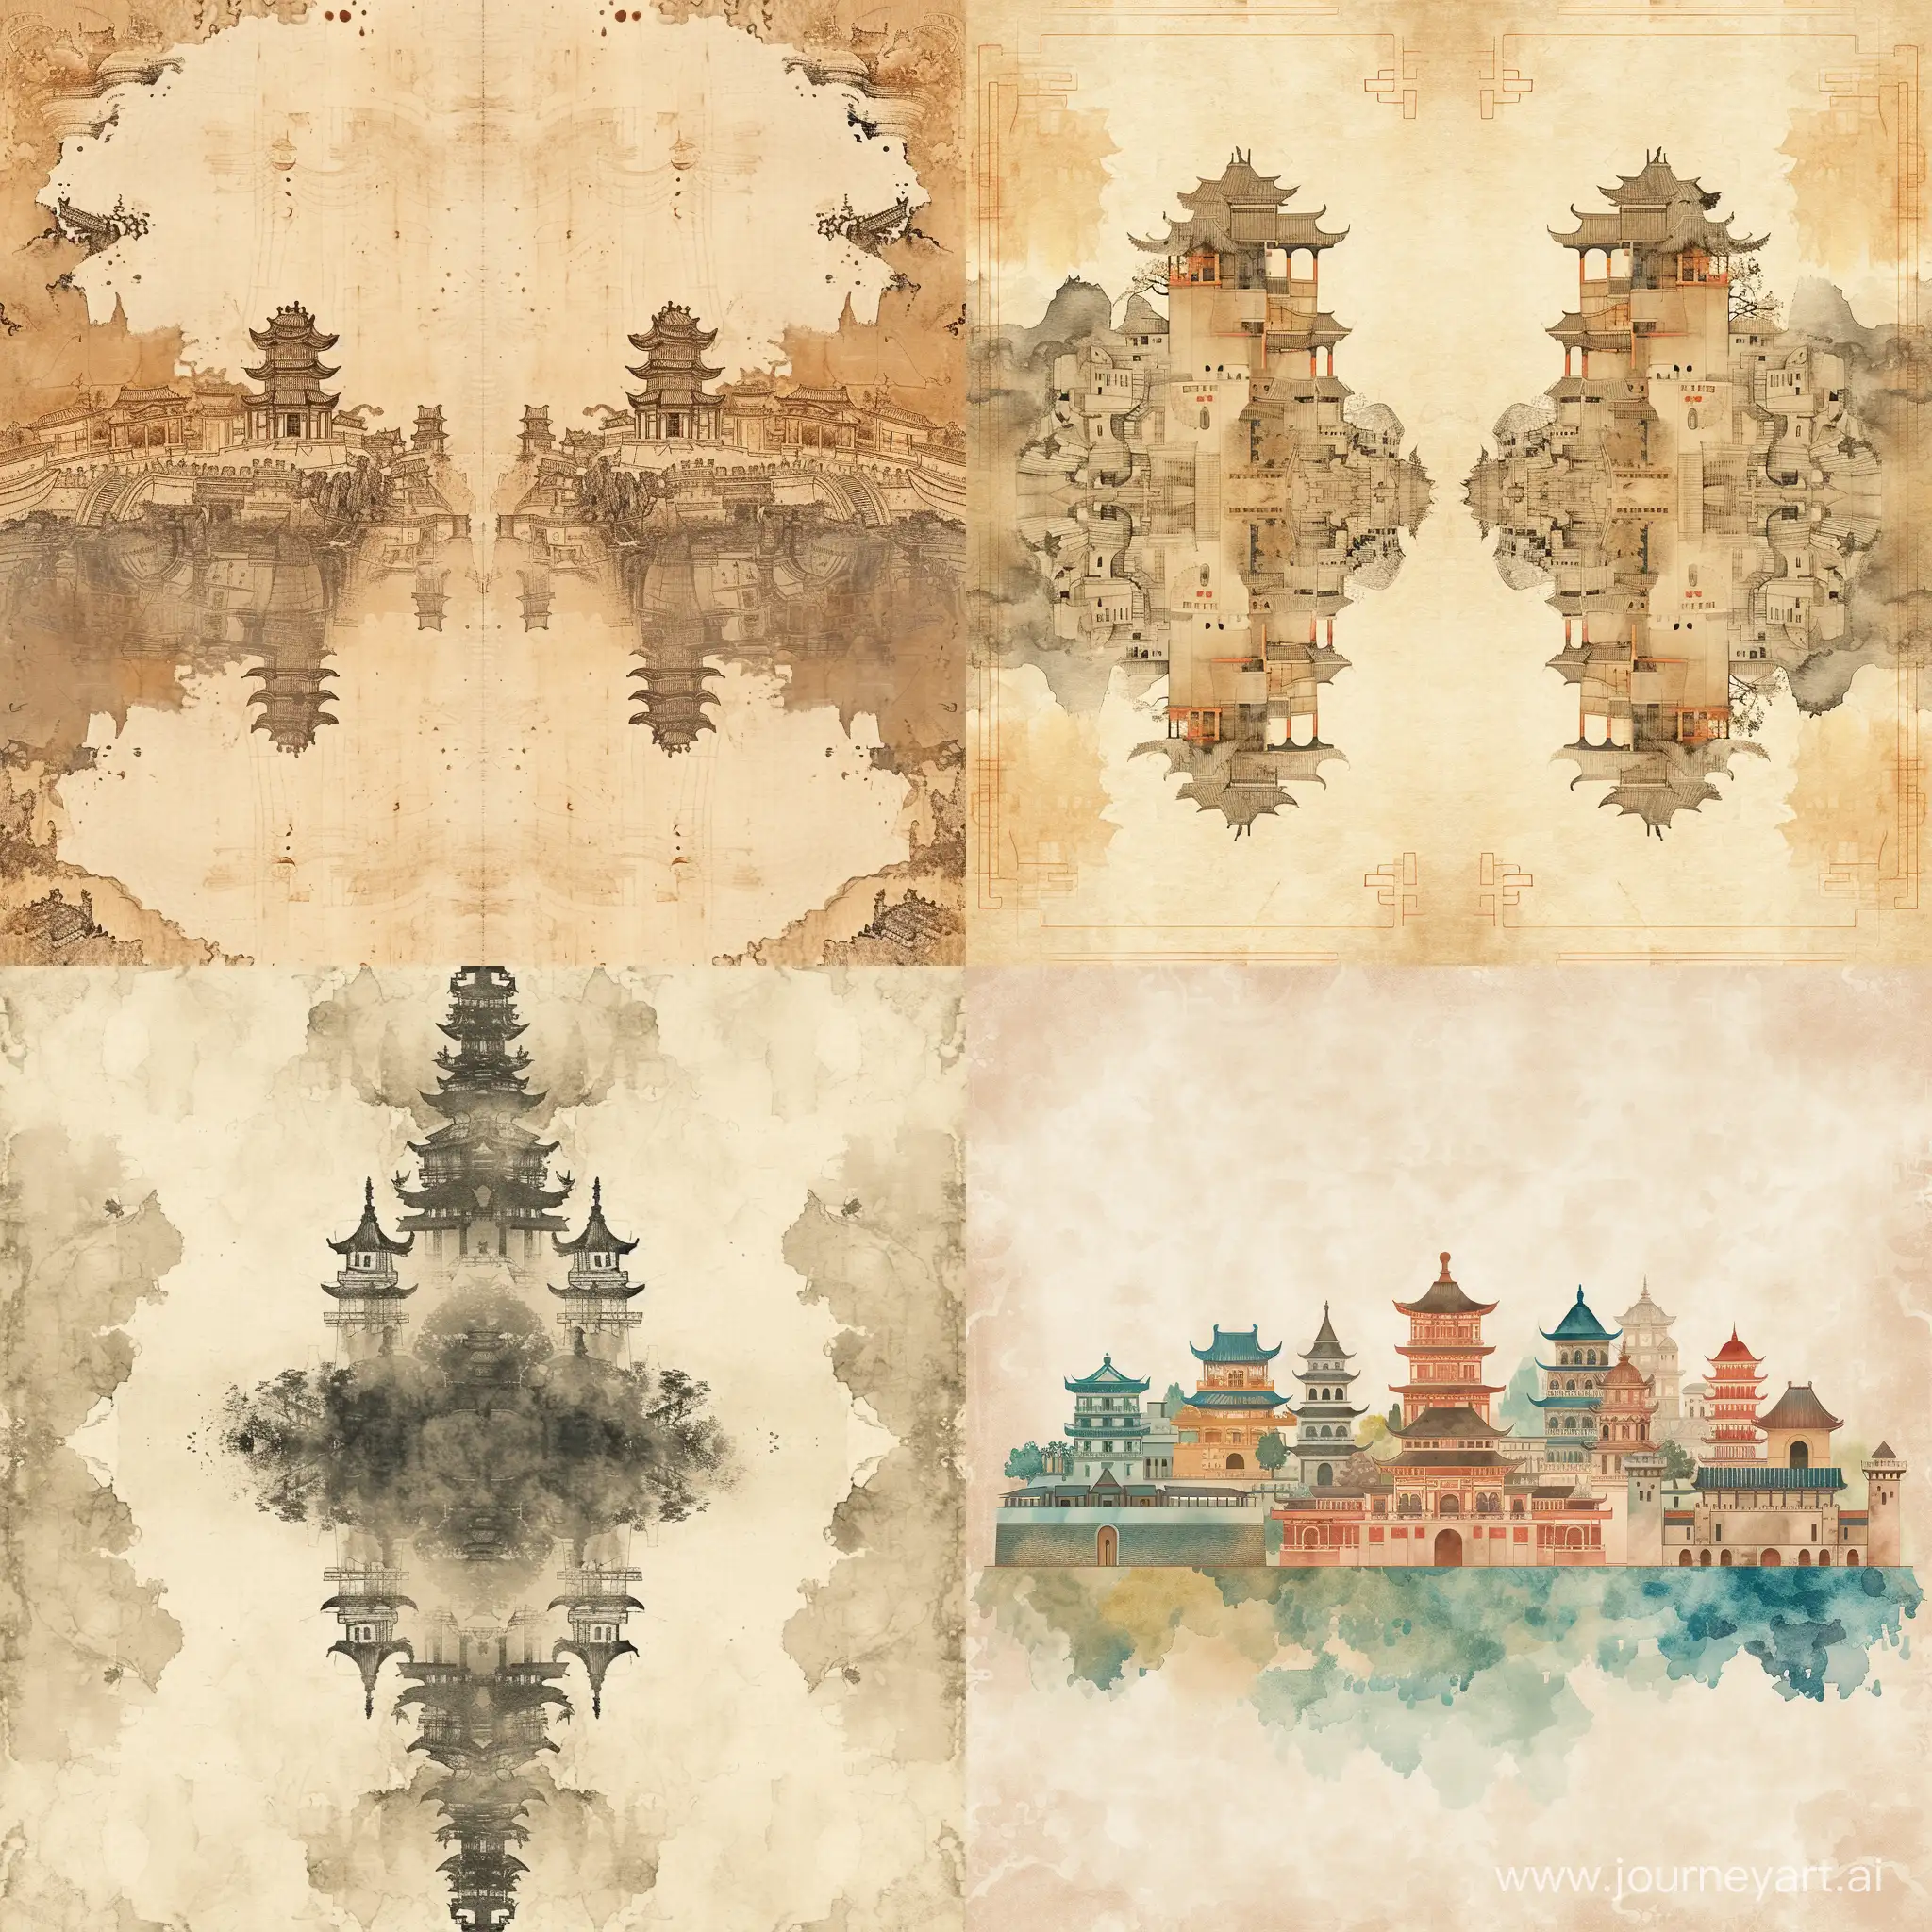 Symmetrical texture of antique paper, barely noticeable elements of ancientChinese, Roman cities, stylized caricature, watercolor, decorative, flat drawing
 